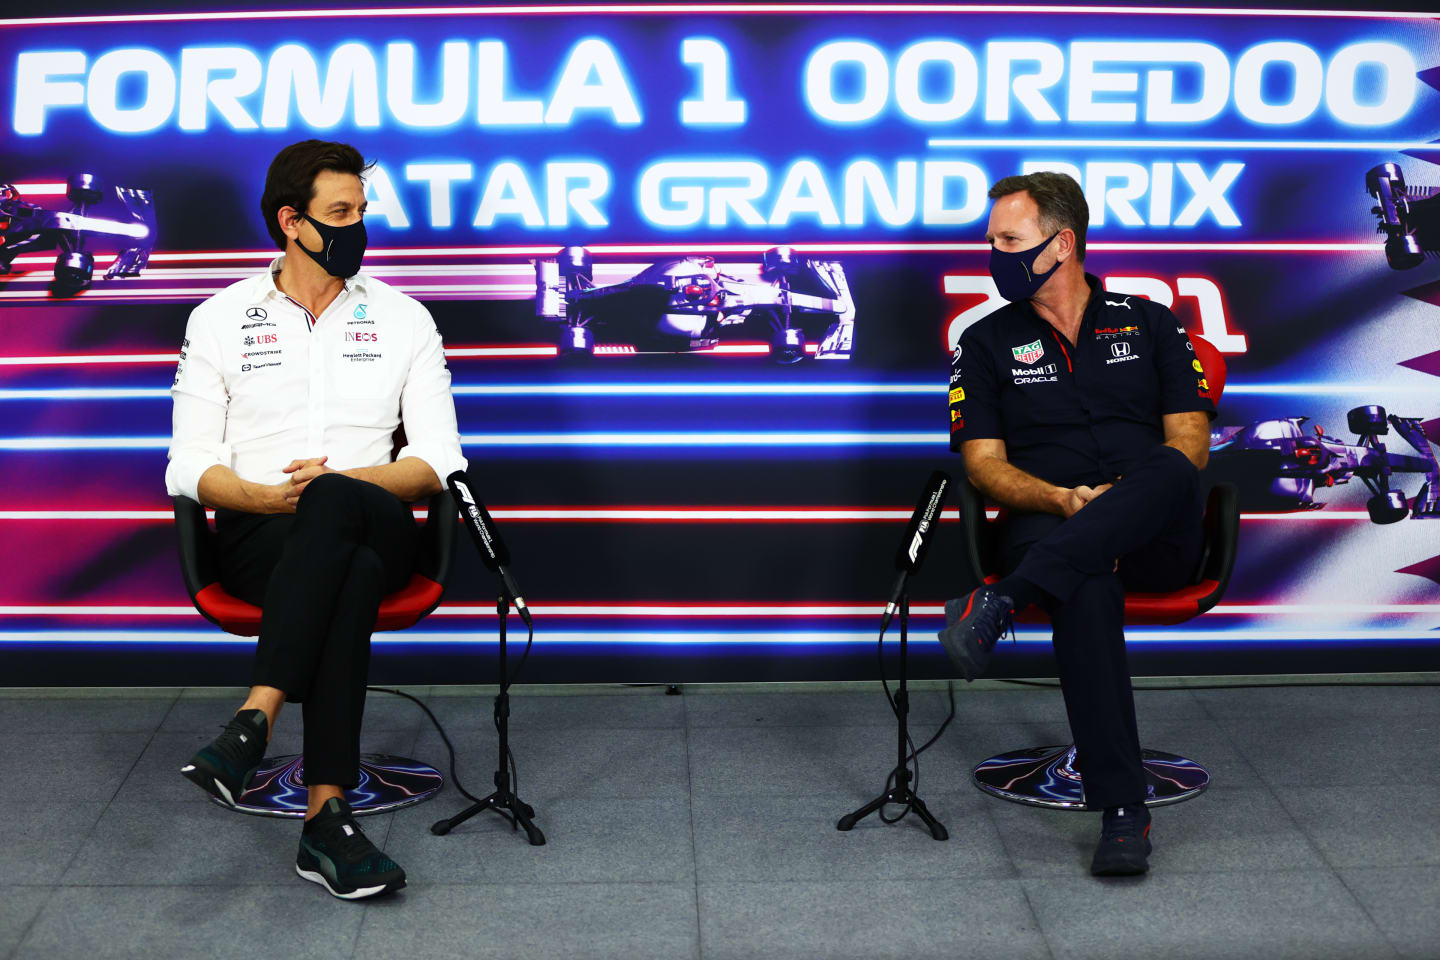 DOHA, QATAR - NOVEMBER 19: Mercedes GP Executive Director Toto Wolff and Red Bull Racing Team Principal Christian Horner talk in the Team Principals Press Conference during practice ahead of the F1 Grand Prix of Qatar at Losail International Circuit on November 19, 2021 in Doha, Qatar. (Photo by Dan Istitene/Getty Images)